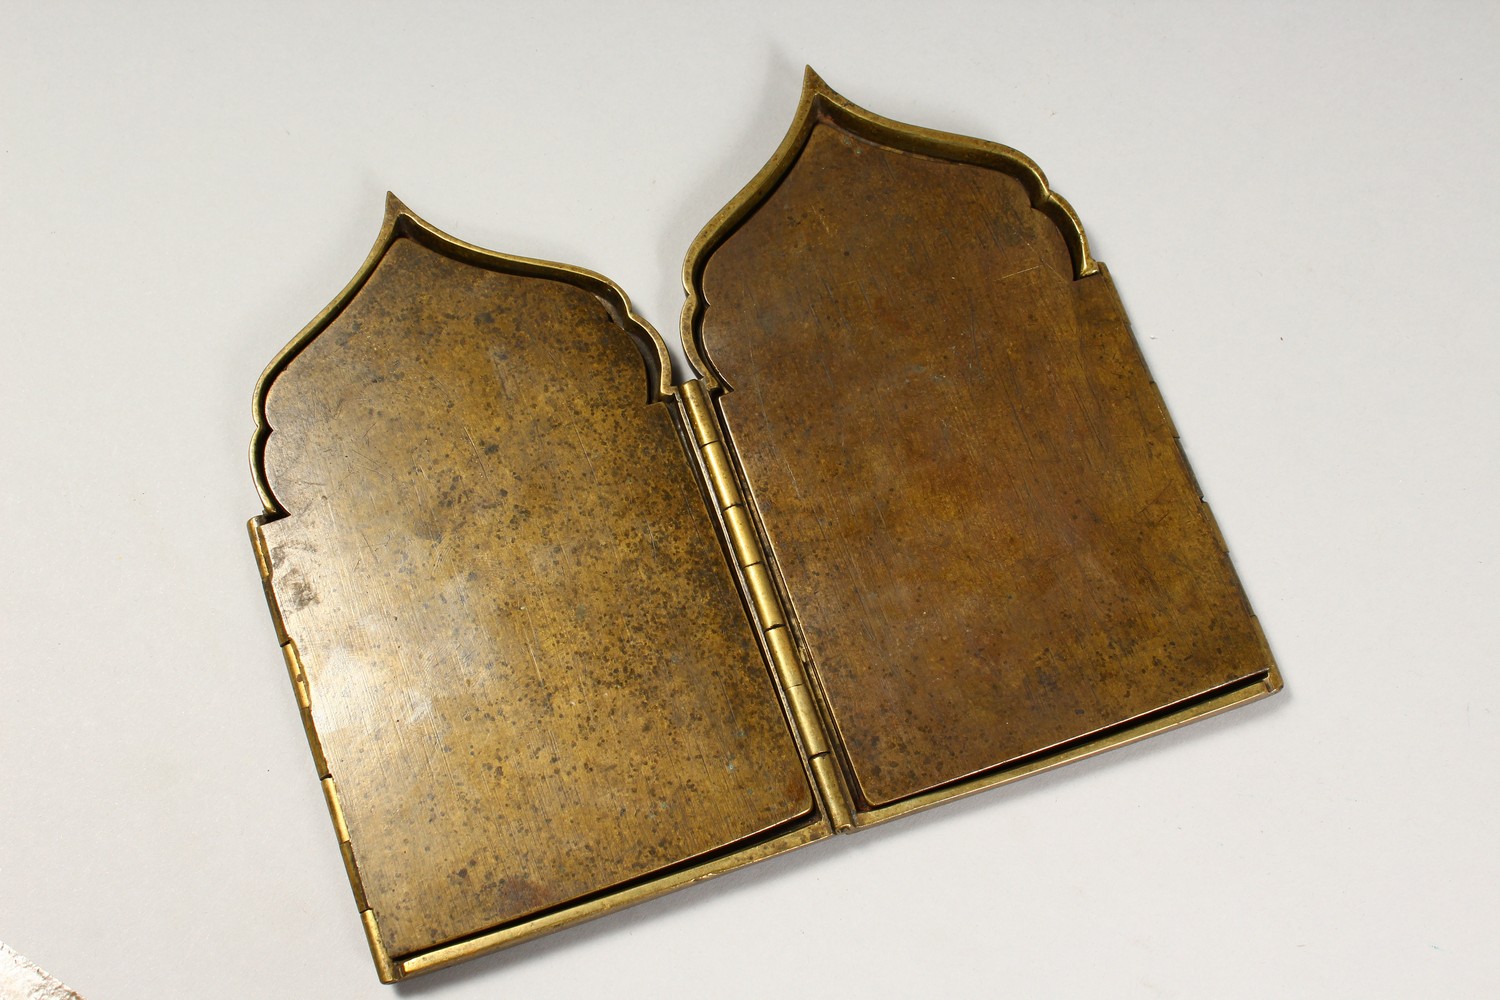 A FOUR PIECE RUSSIAN BRASS AND BLUE ENAMEL FOLDING ICON, with sixteen small panels, 1.75ins square - Image 6 of 11